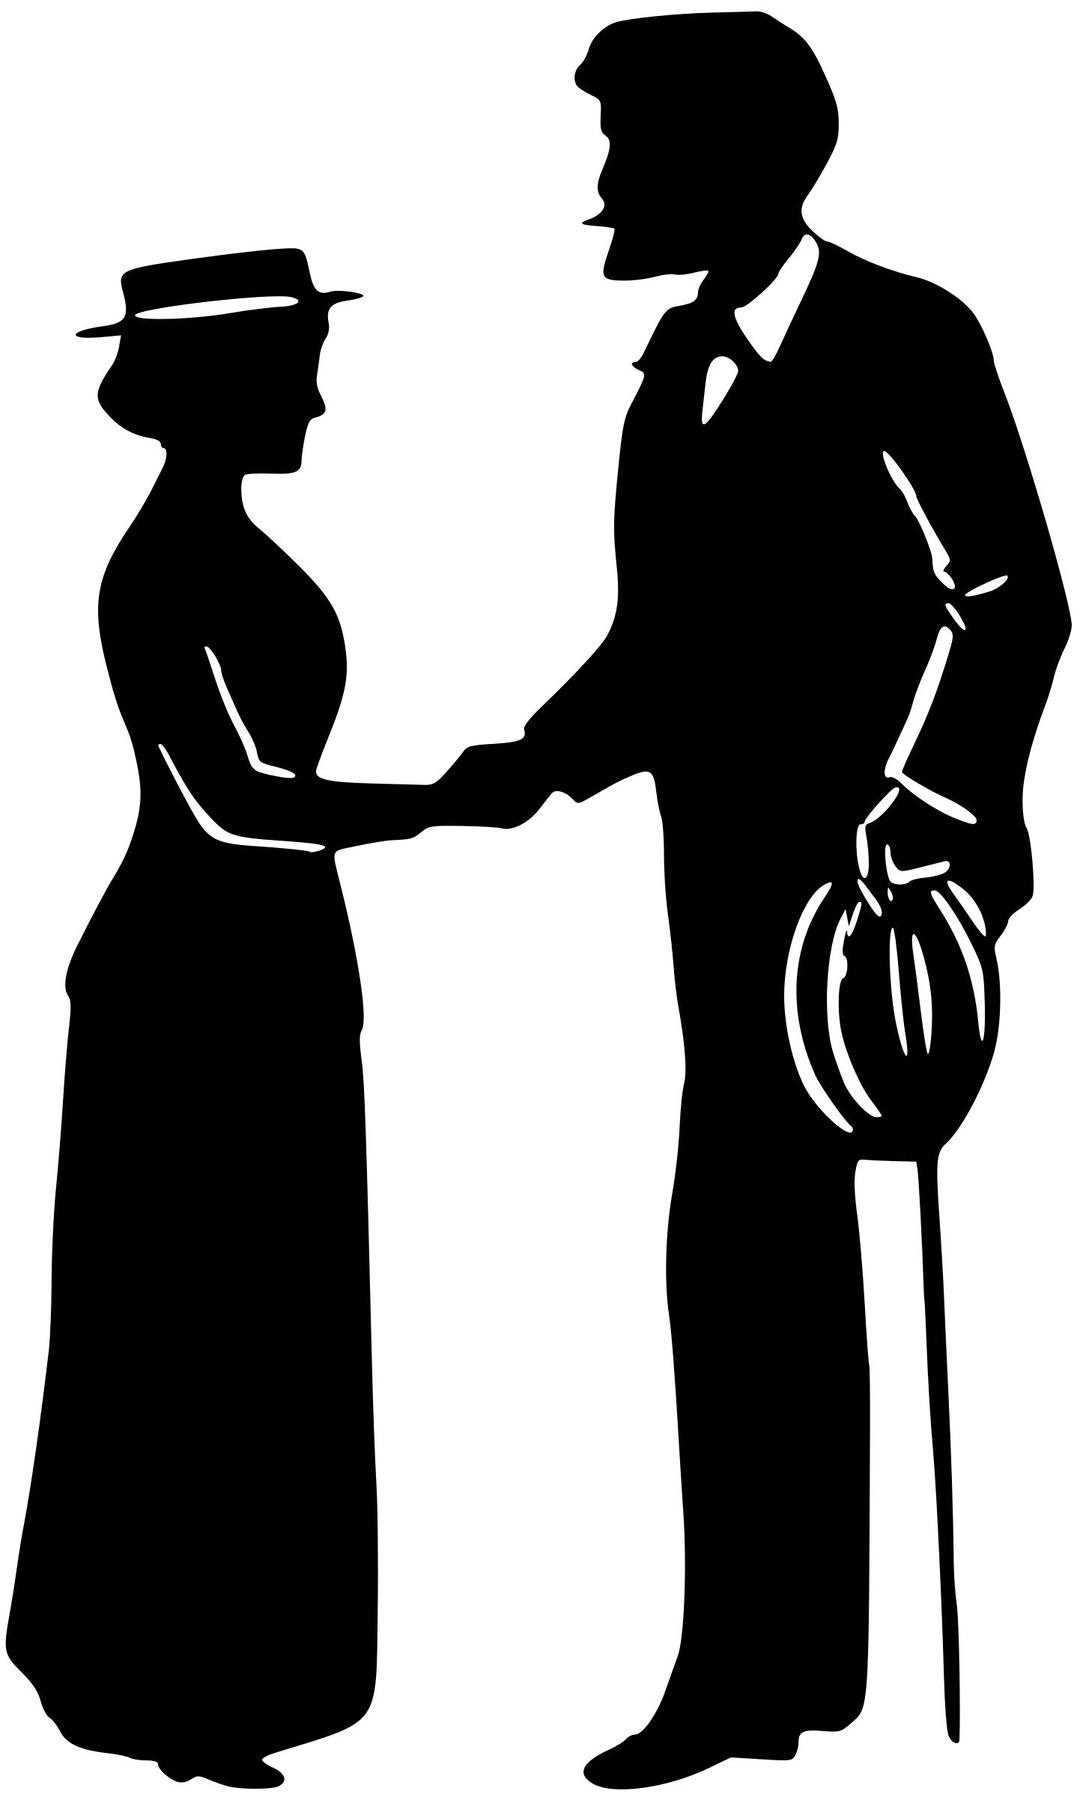 Man and lady shaking hands png transparent